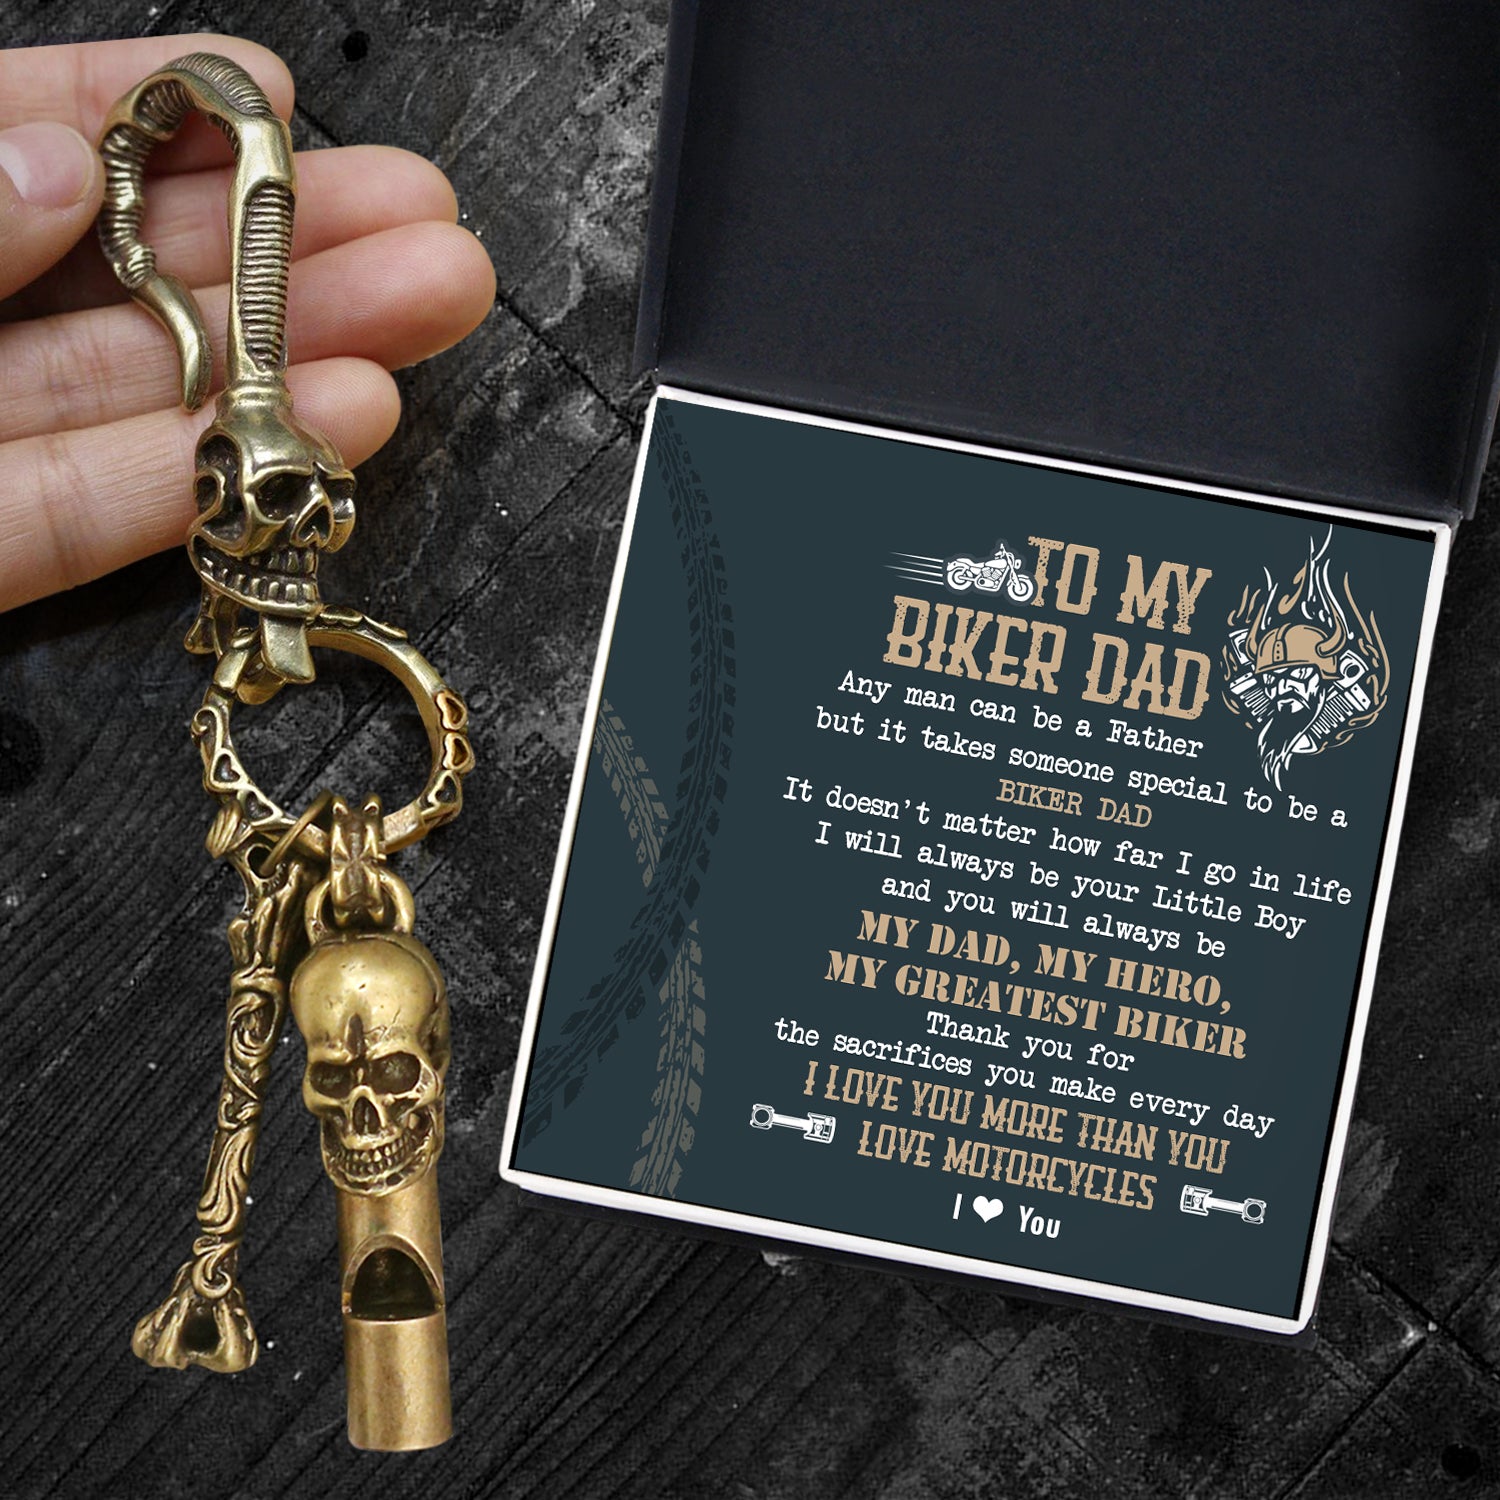 Skull Keychain Holder - Biker - To My Dad - Thank You For The Sacrifices You Make Every Day - Ukgkci18011